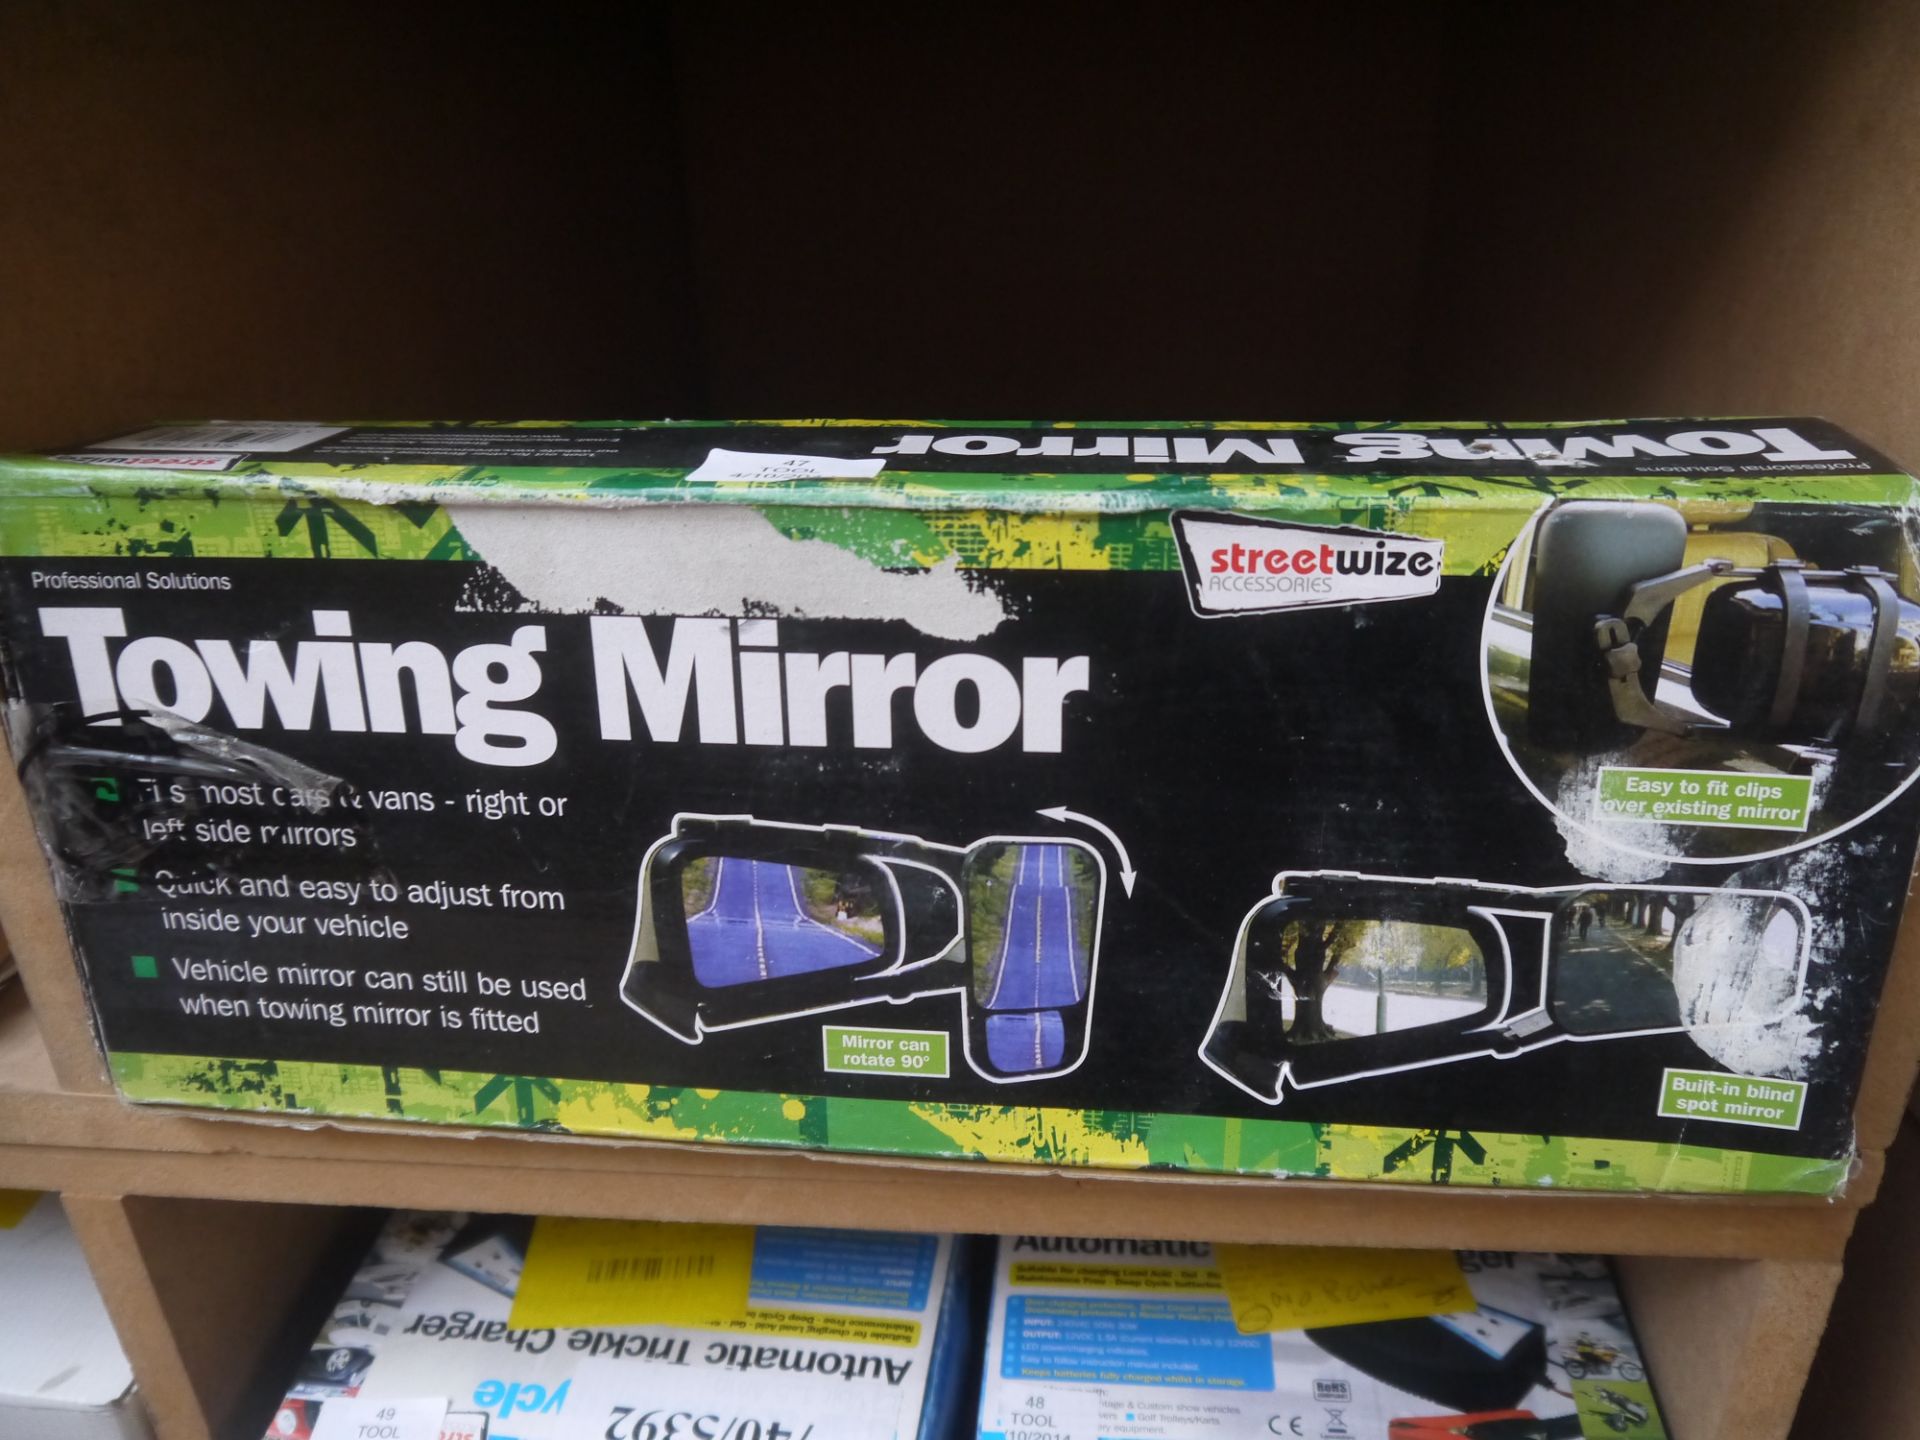 StreetWize Towing Mirror. Boxed.